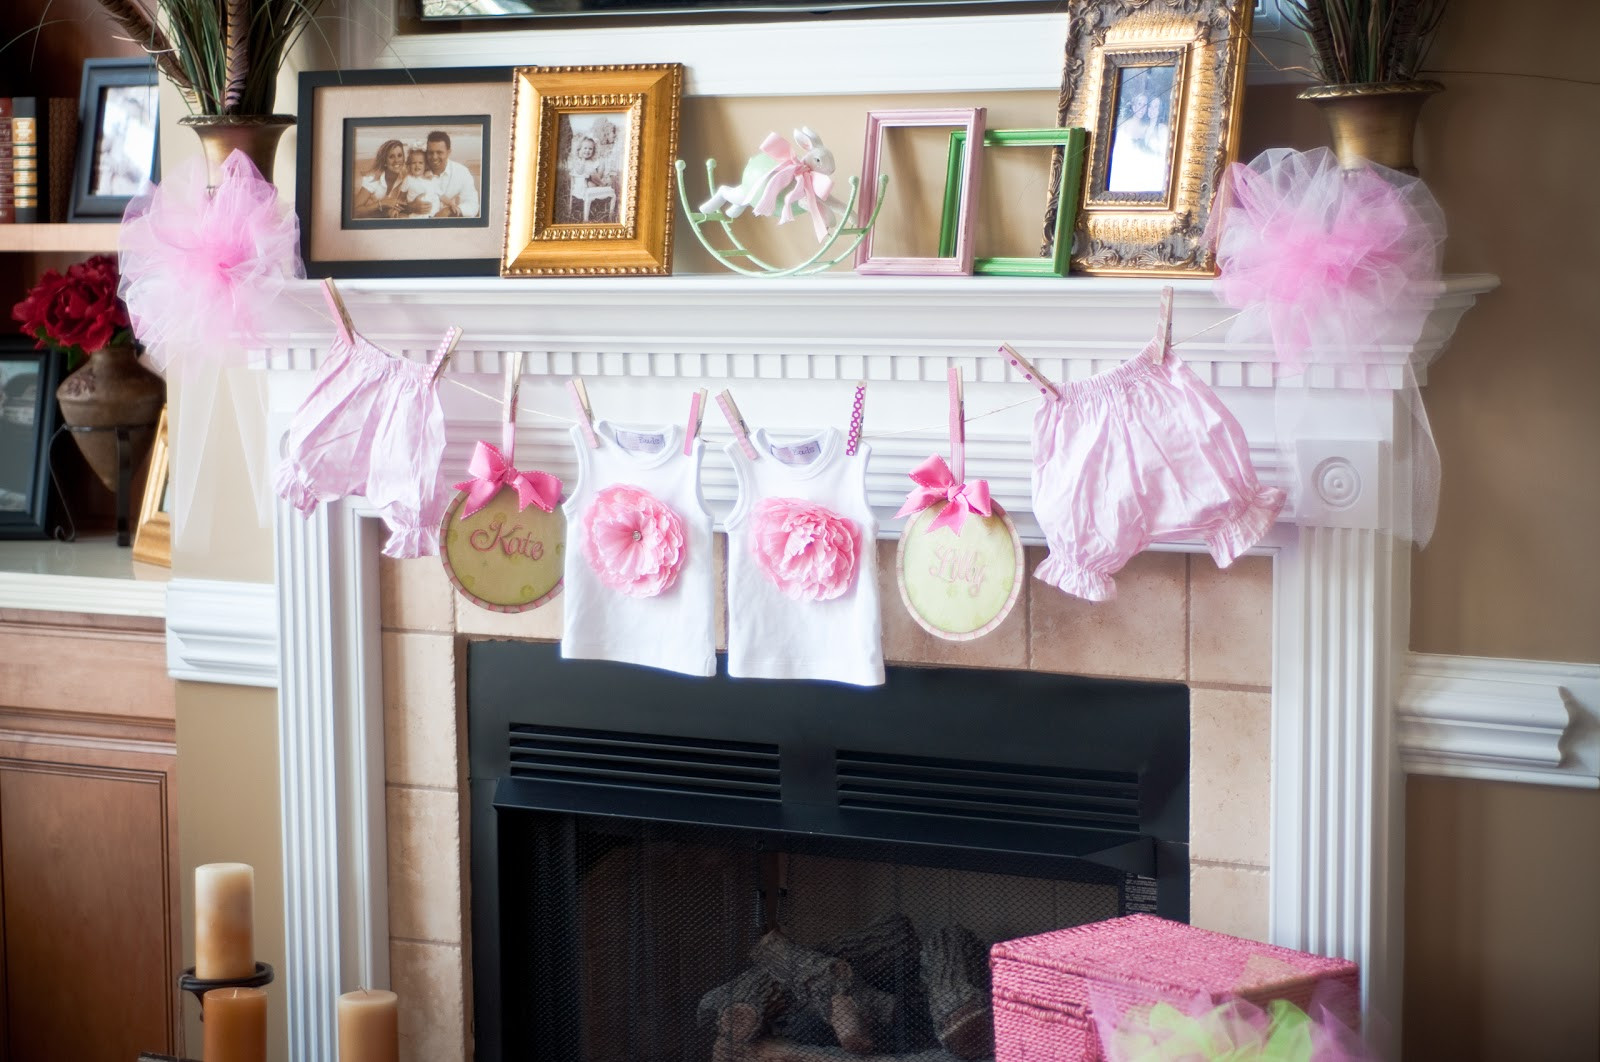 Decoration Ideas For Baby Shower
 paws & re thread baby shower decorating ideas clothes